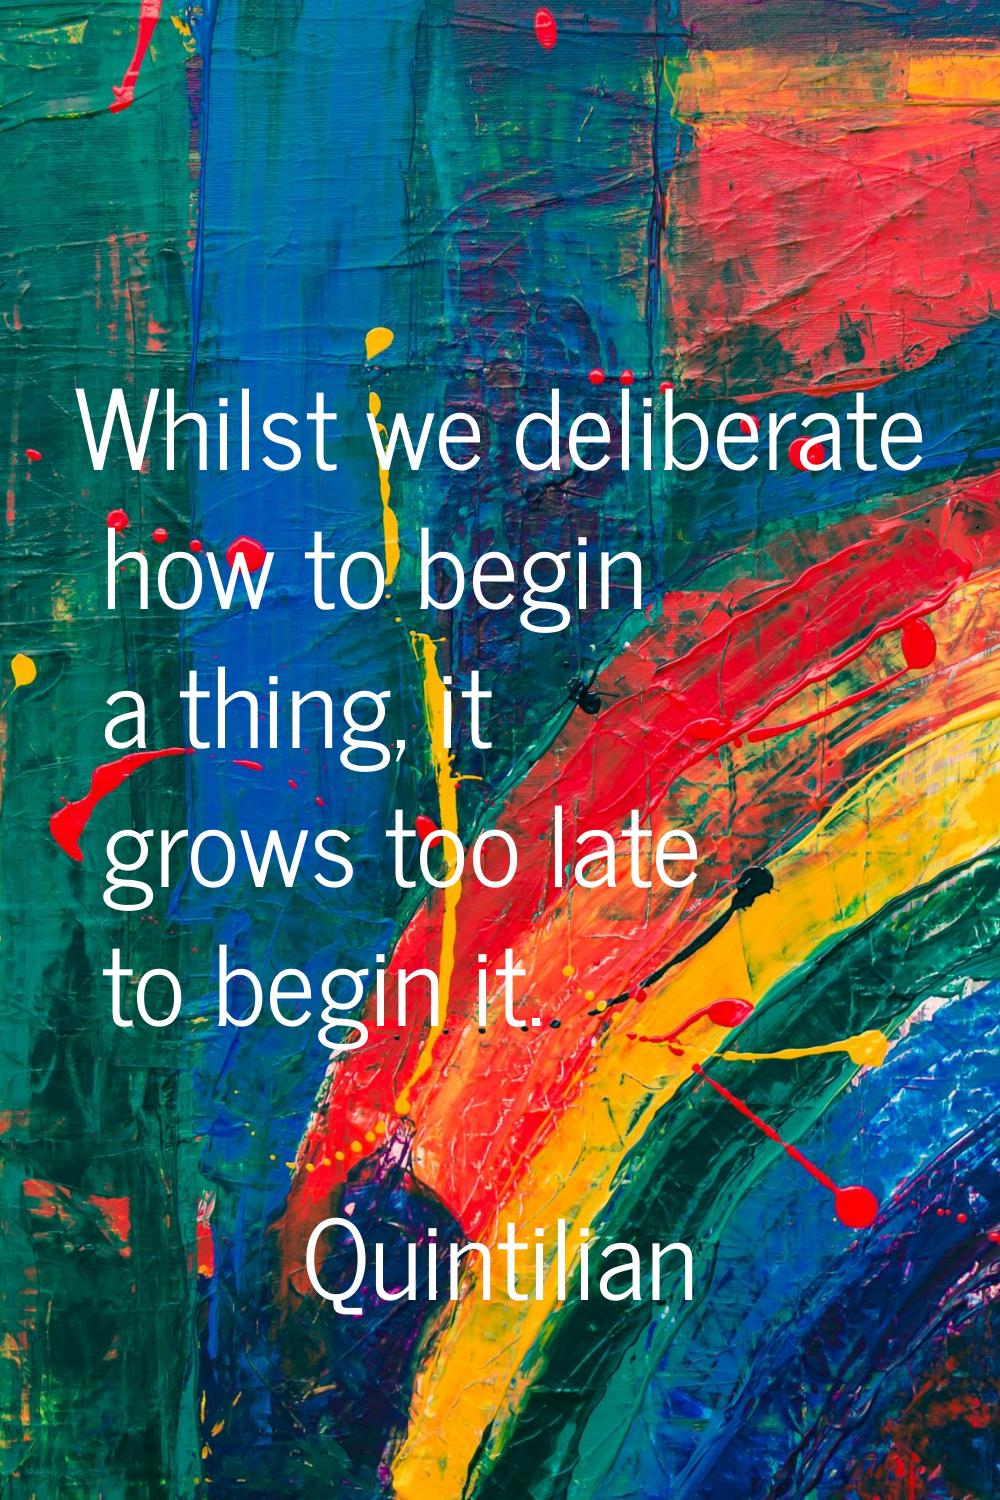 Whilst we deliberate how to begin a thing, it grows too late to begin it.